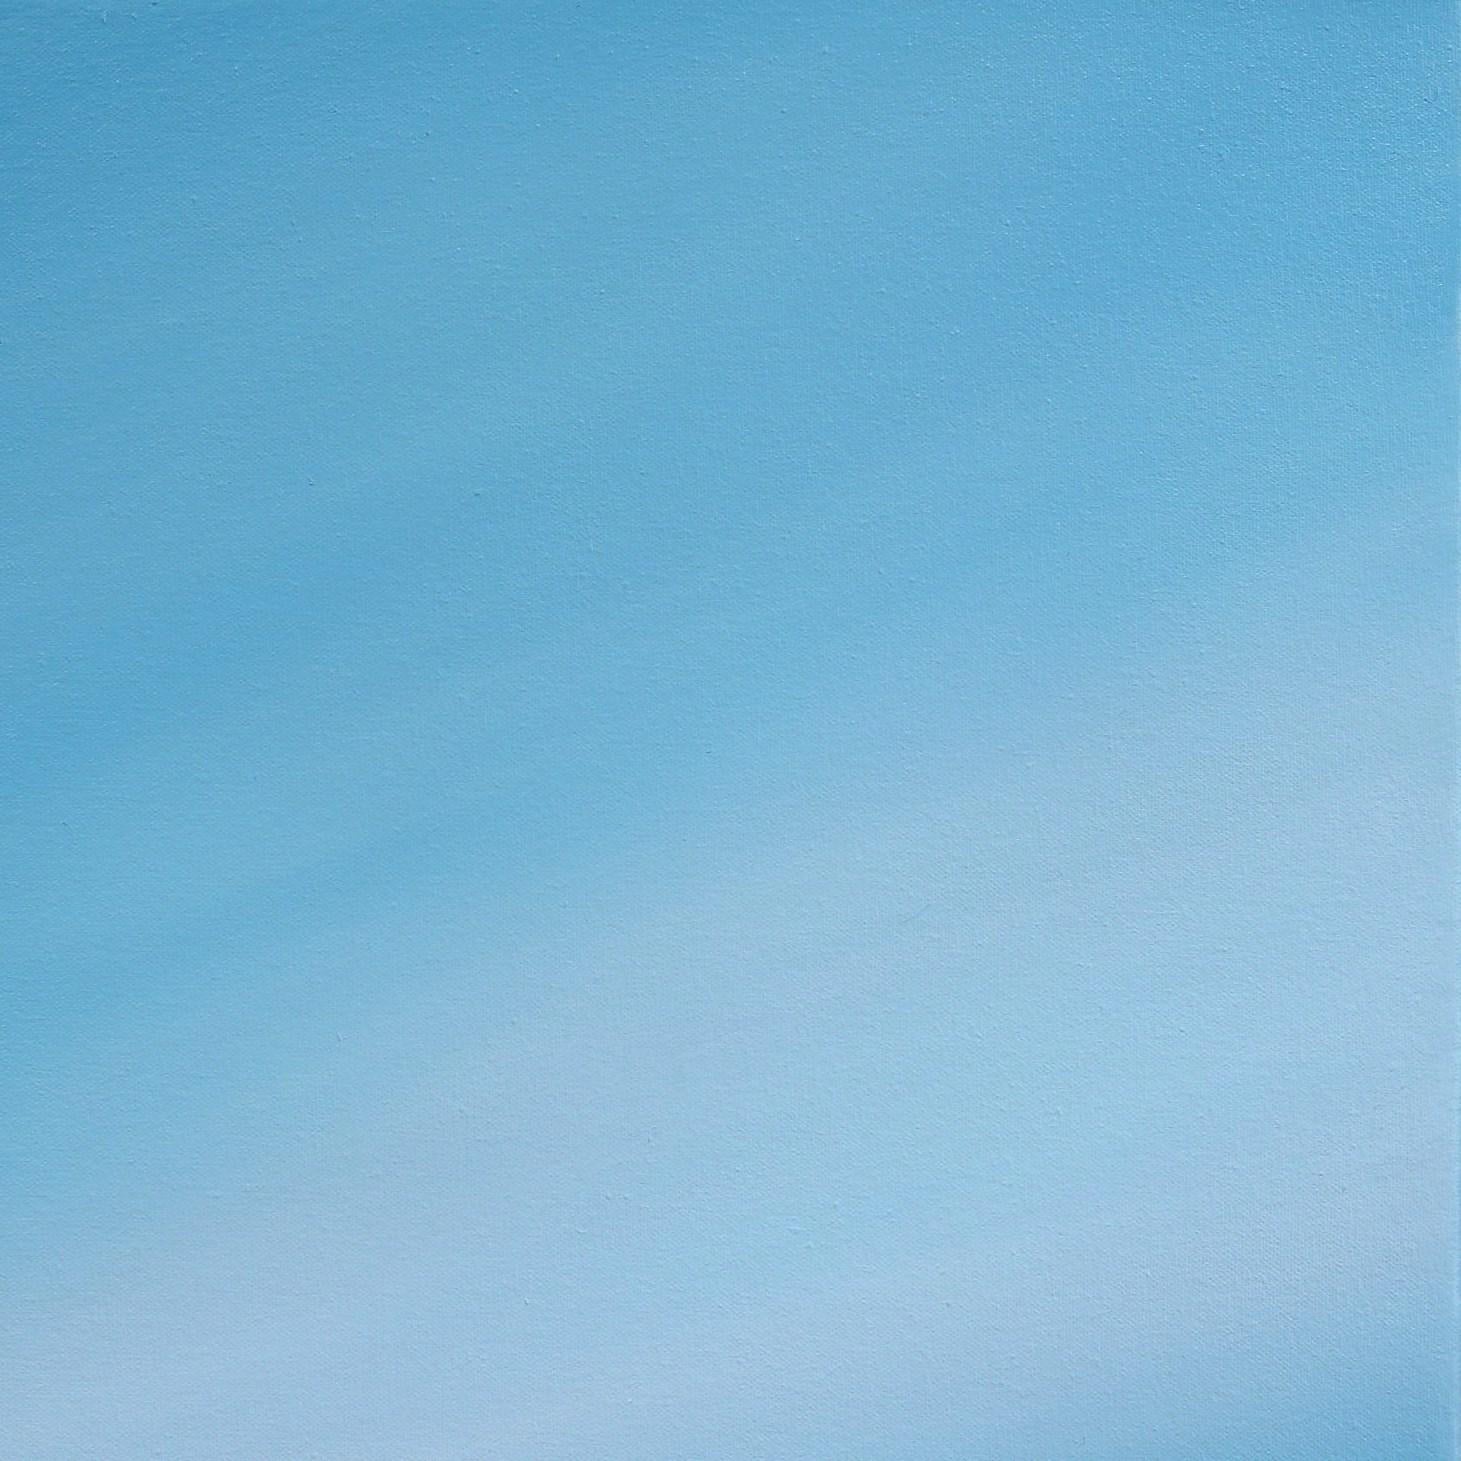 Untitled No. 763 - Framed Contemporary Minimalist Blue Artwork For Sale 3